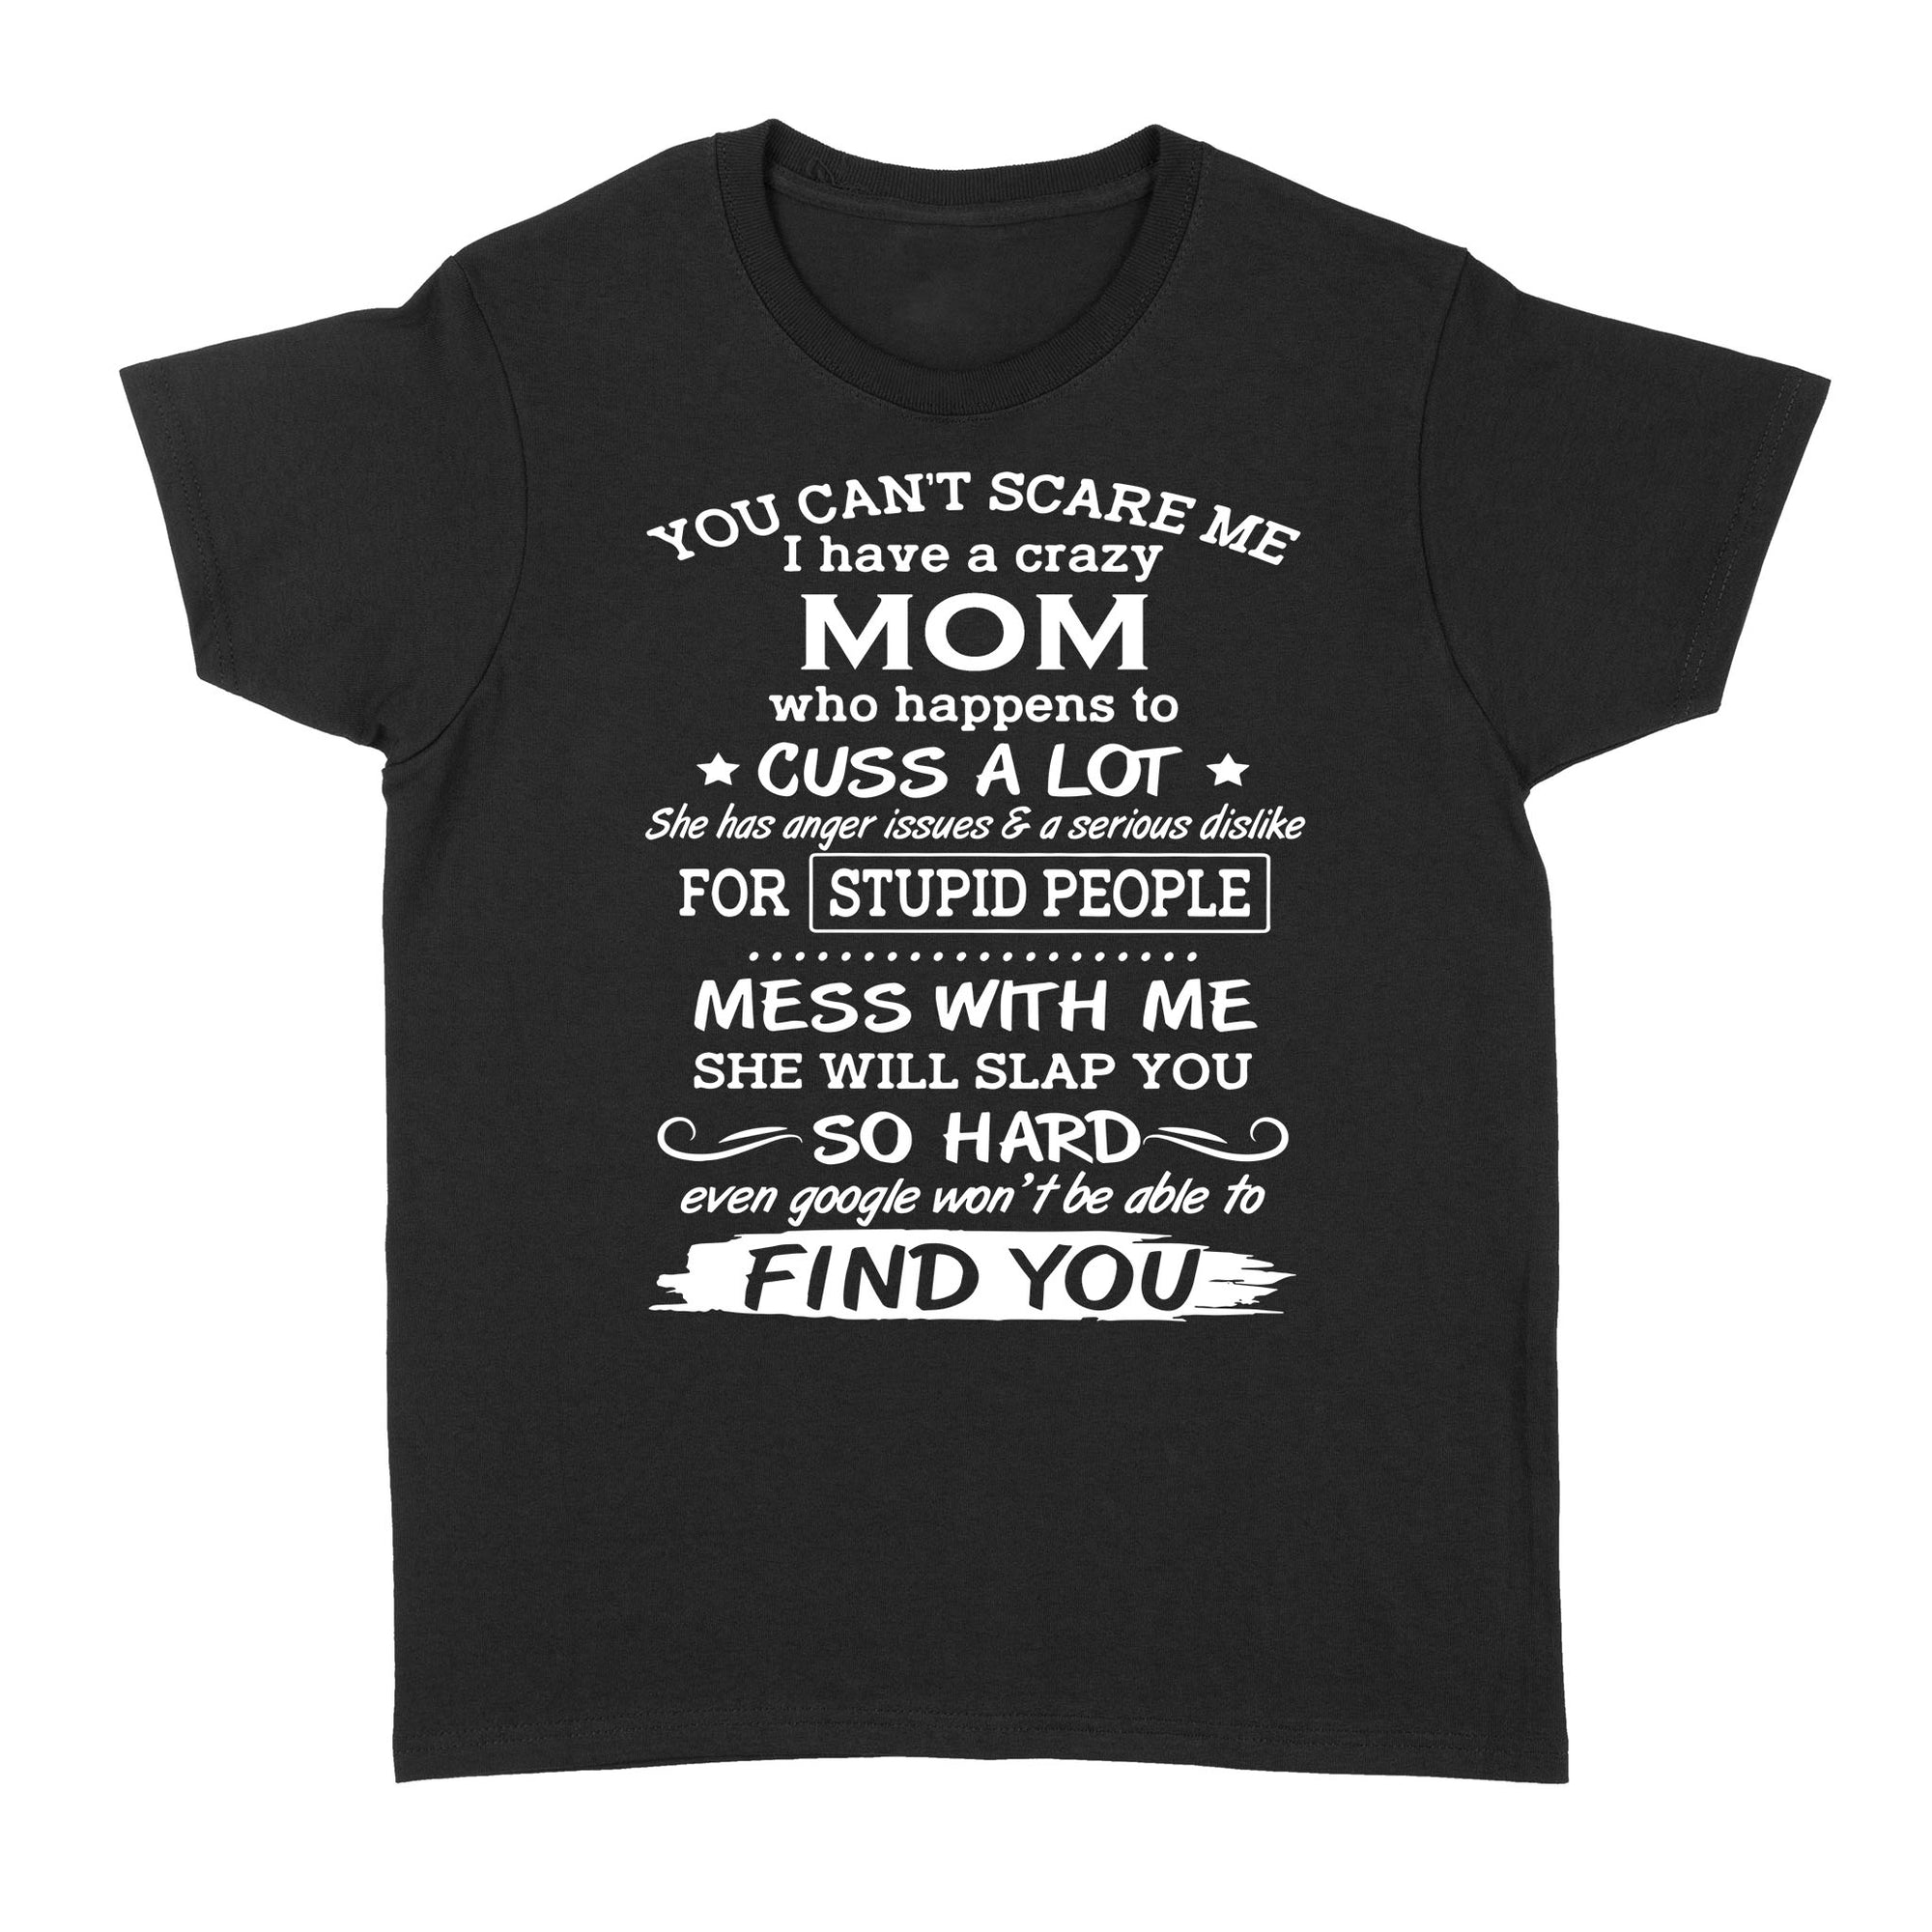 Gift Ideas for Daughter You Can't Scare Me I Have A Crazy Mom Who Happens To Cuss A Lot TL - Standard Women's T-shirt